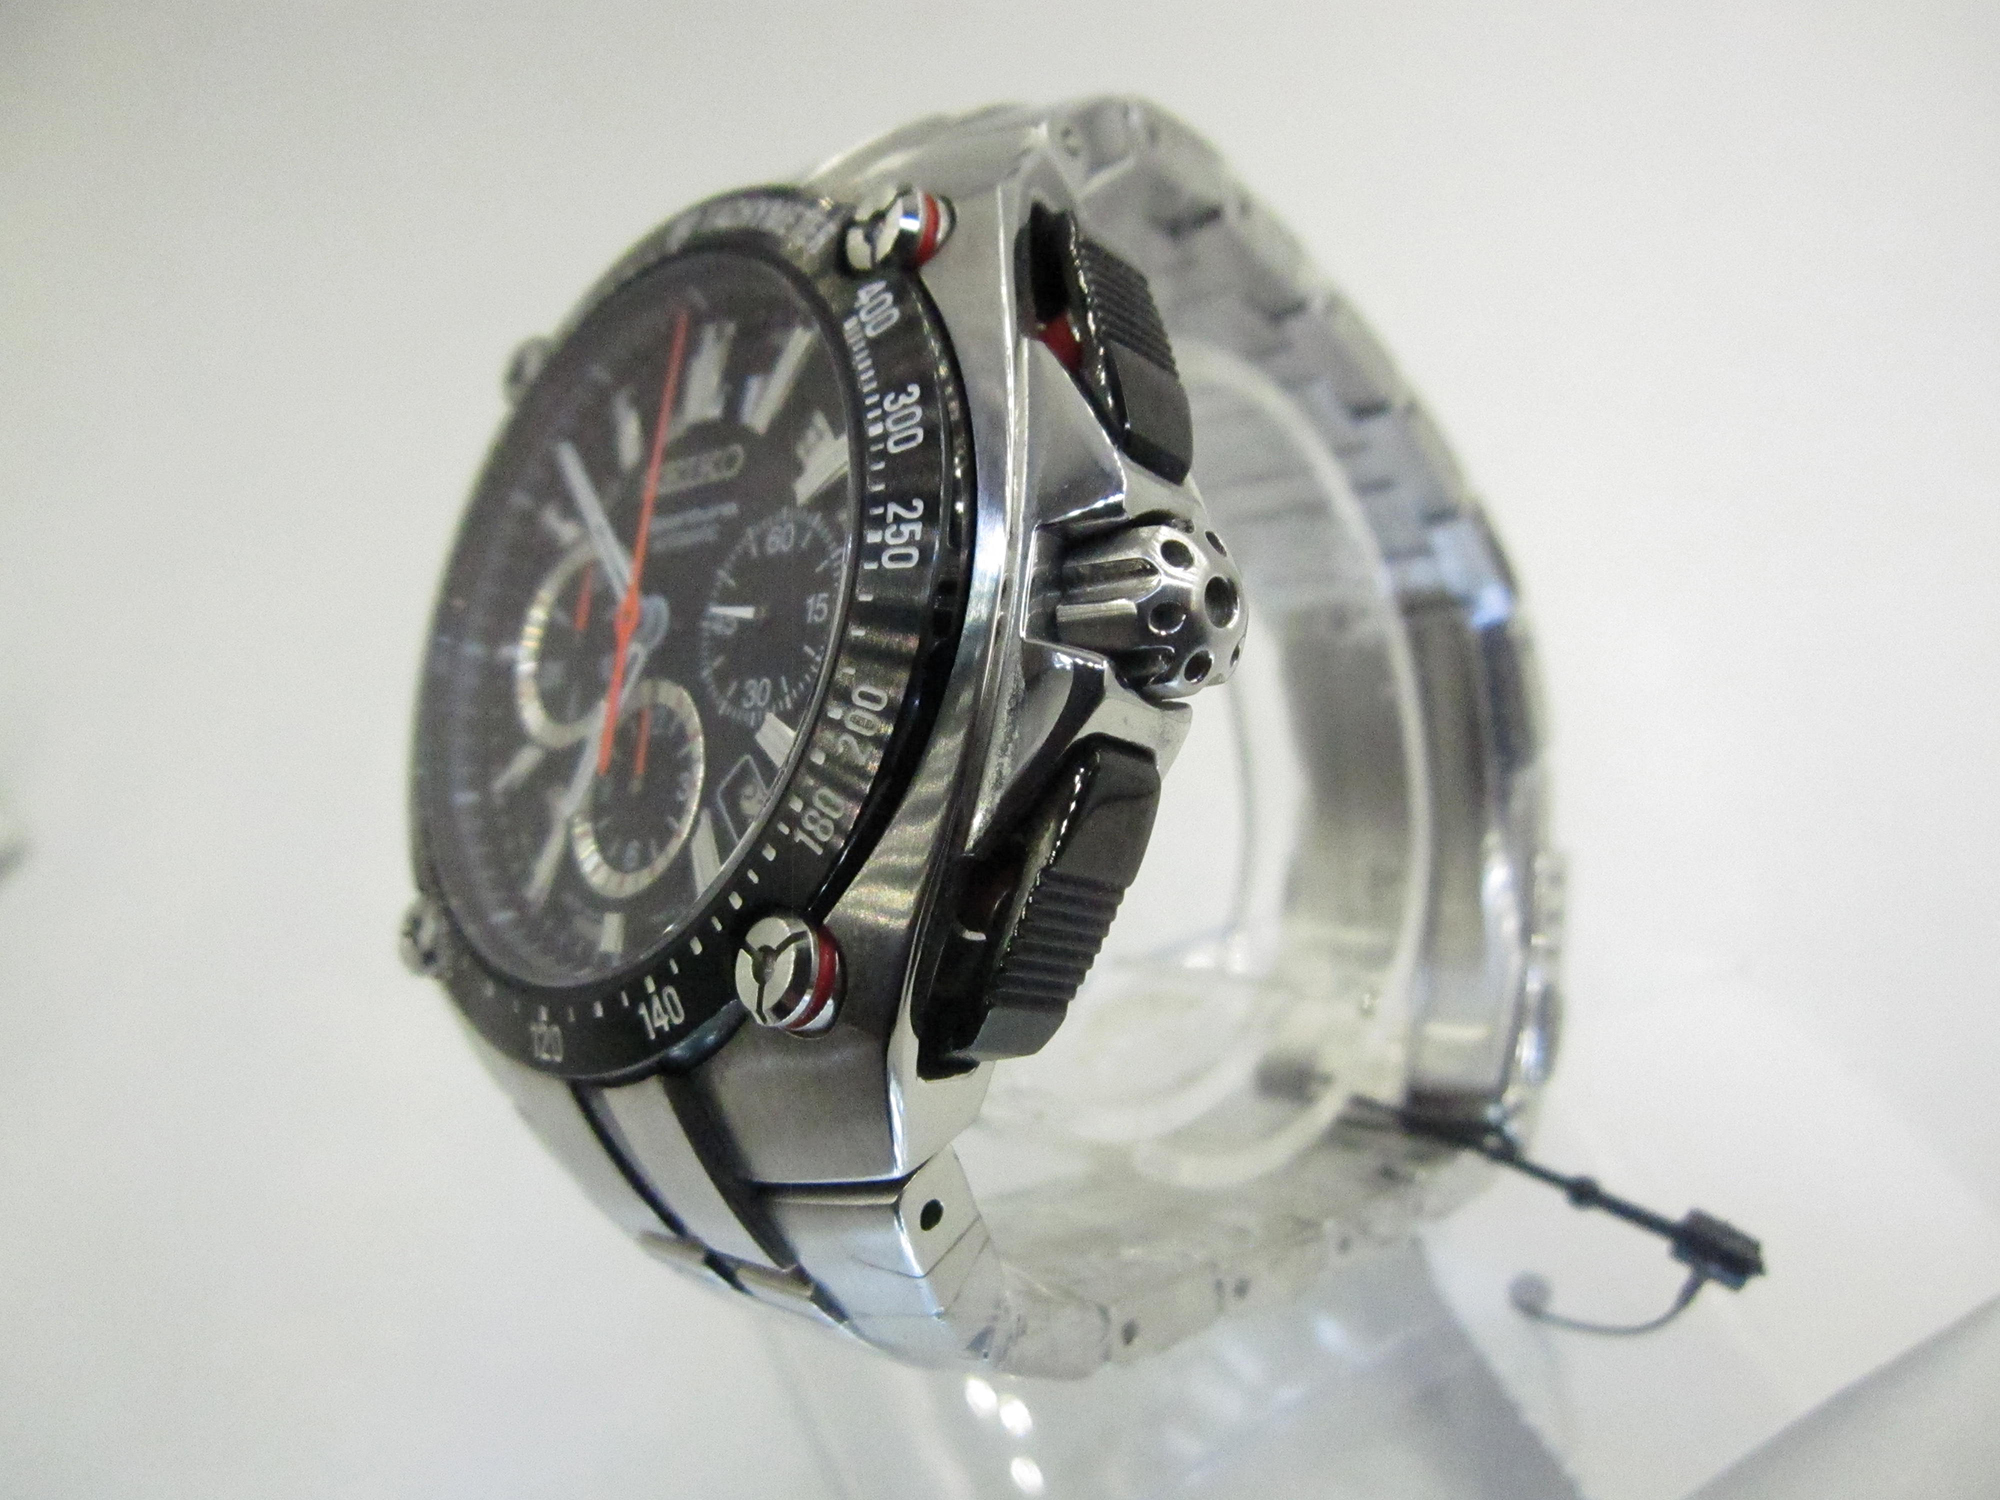 Seiko Sportura Chronograph SRQ007 Limited Edition (Pre Owned) SEIKO-008 -  Watch & Watch Gallery